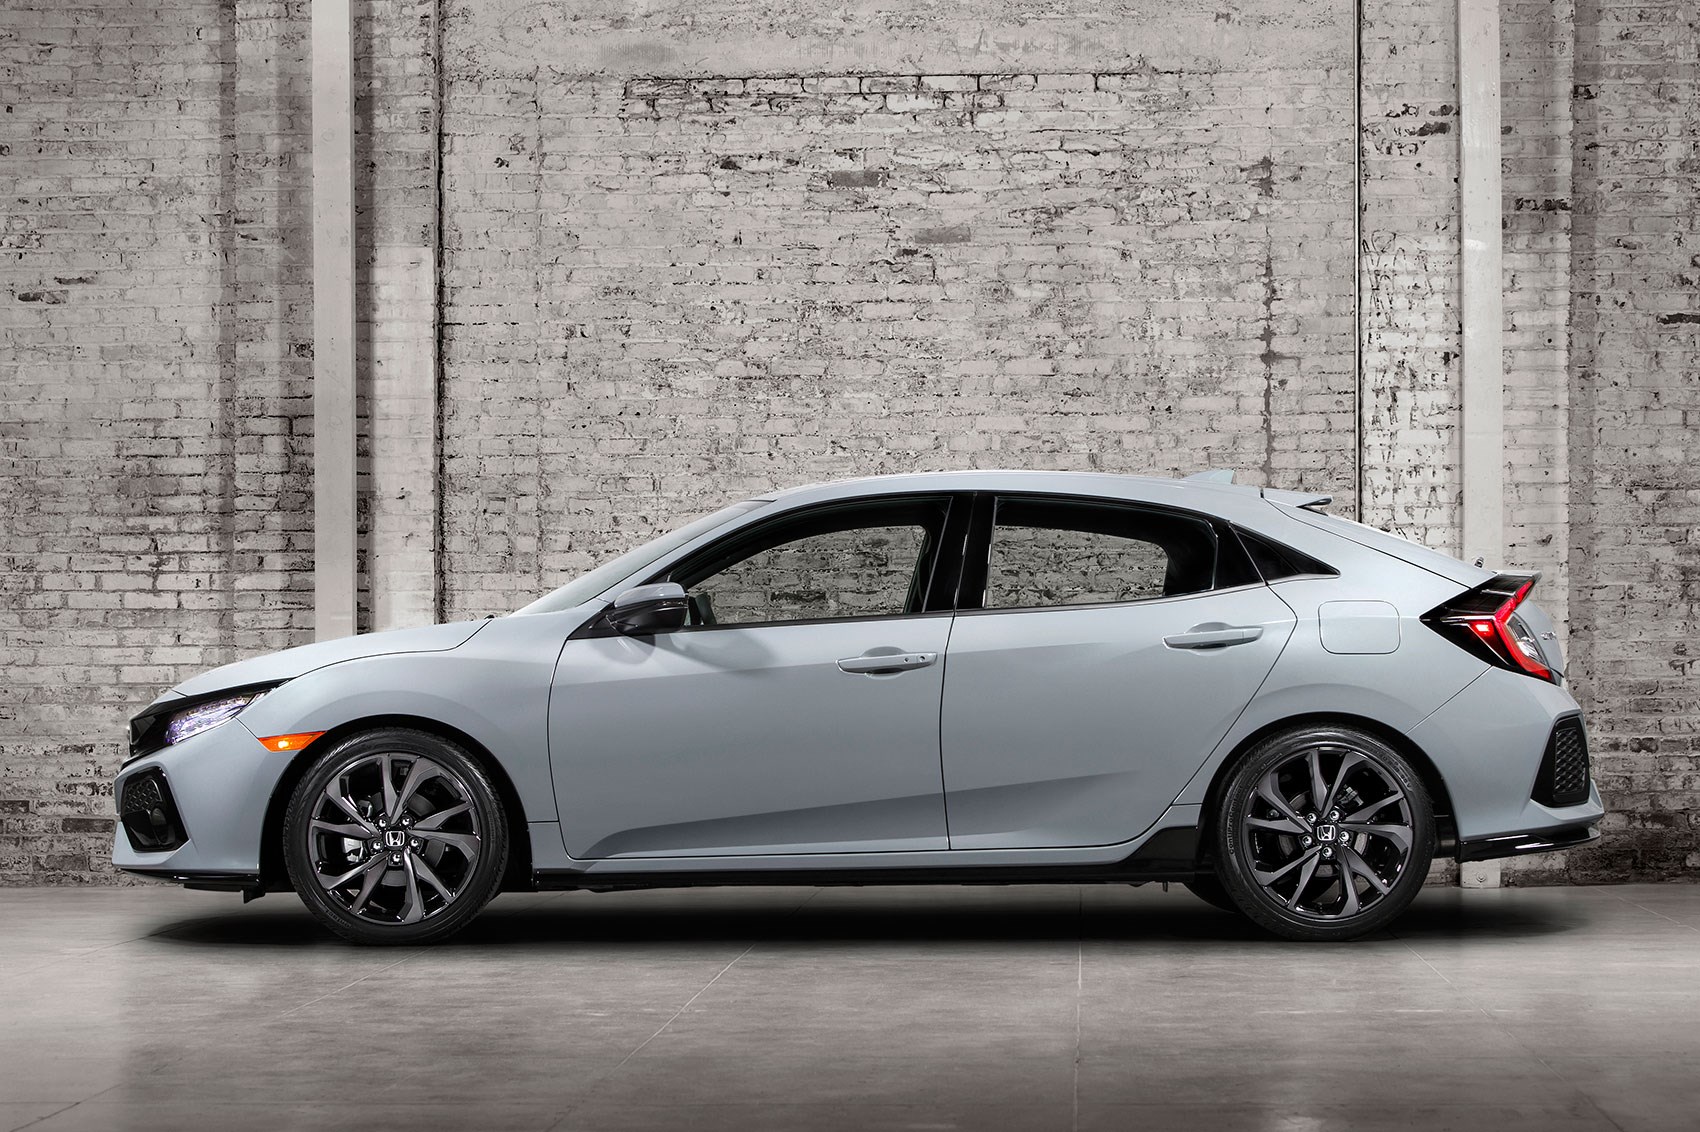 New 2017 Honda Civic Hatchback Officially Unveiled Car